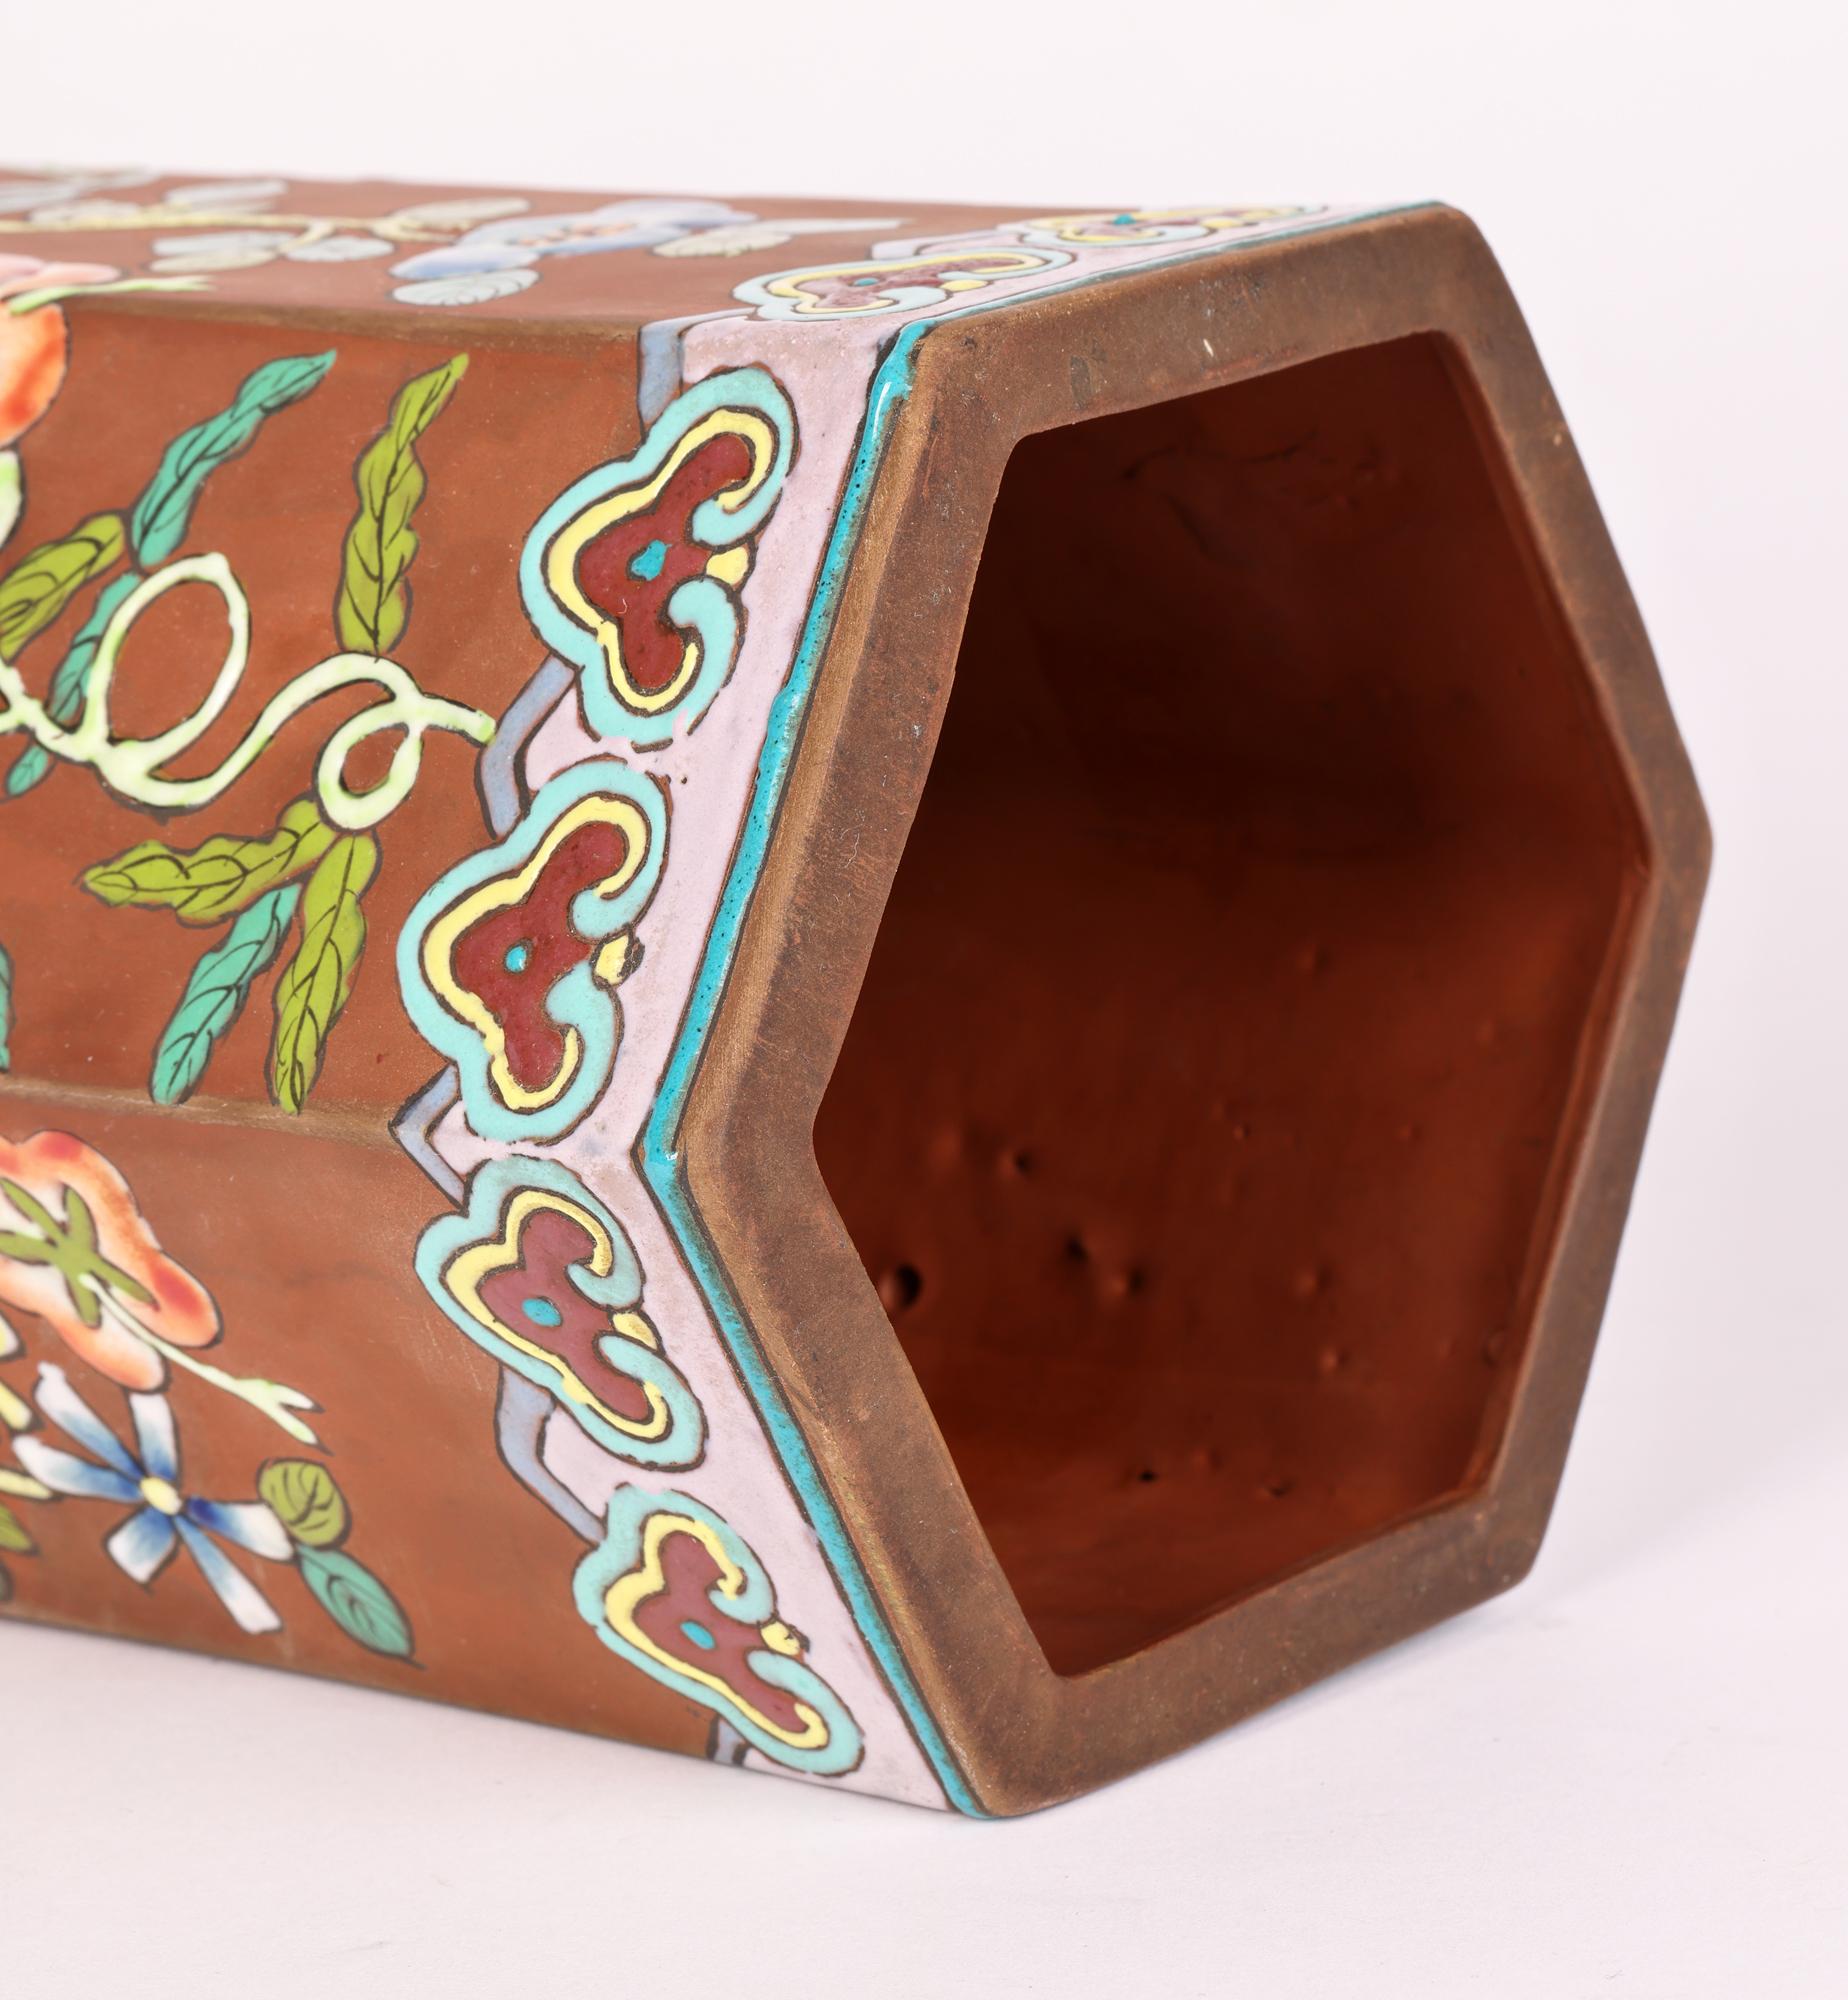 20th Century Chinese Yixing Hexagonal Vase with Painted Floral & Vine Designs For Sale